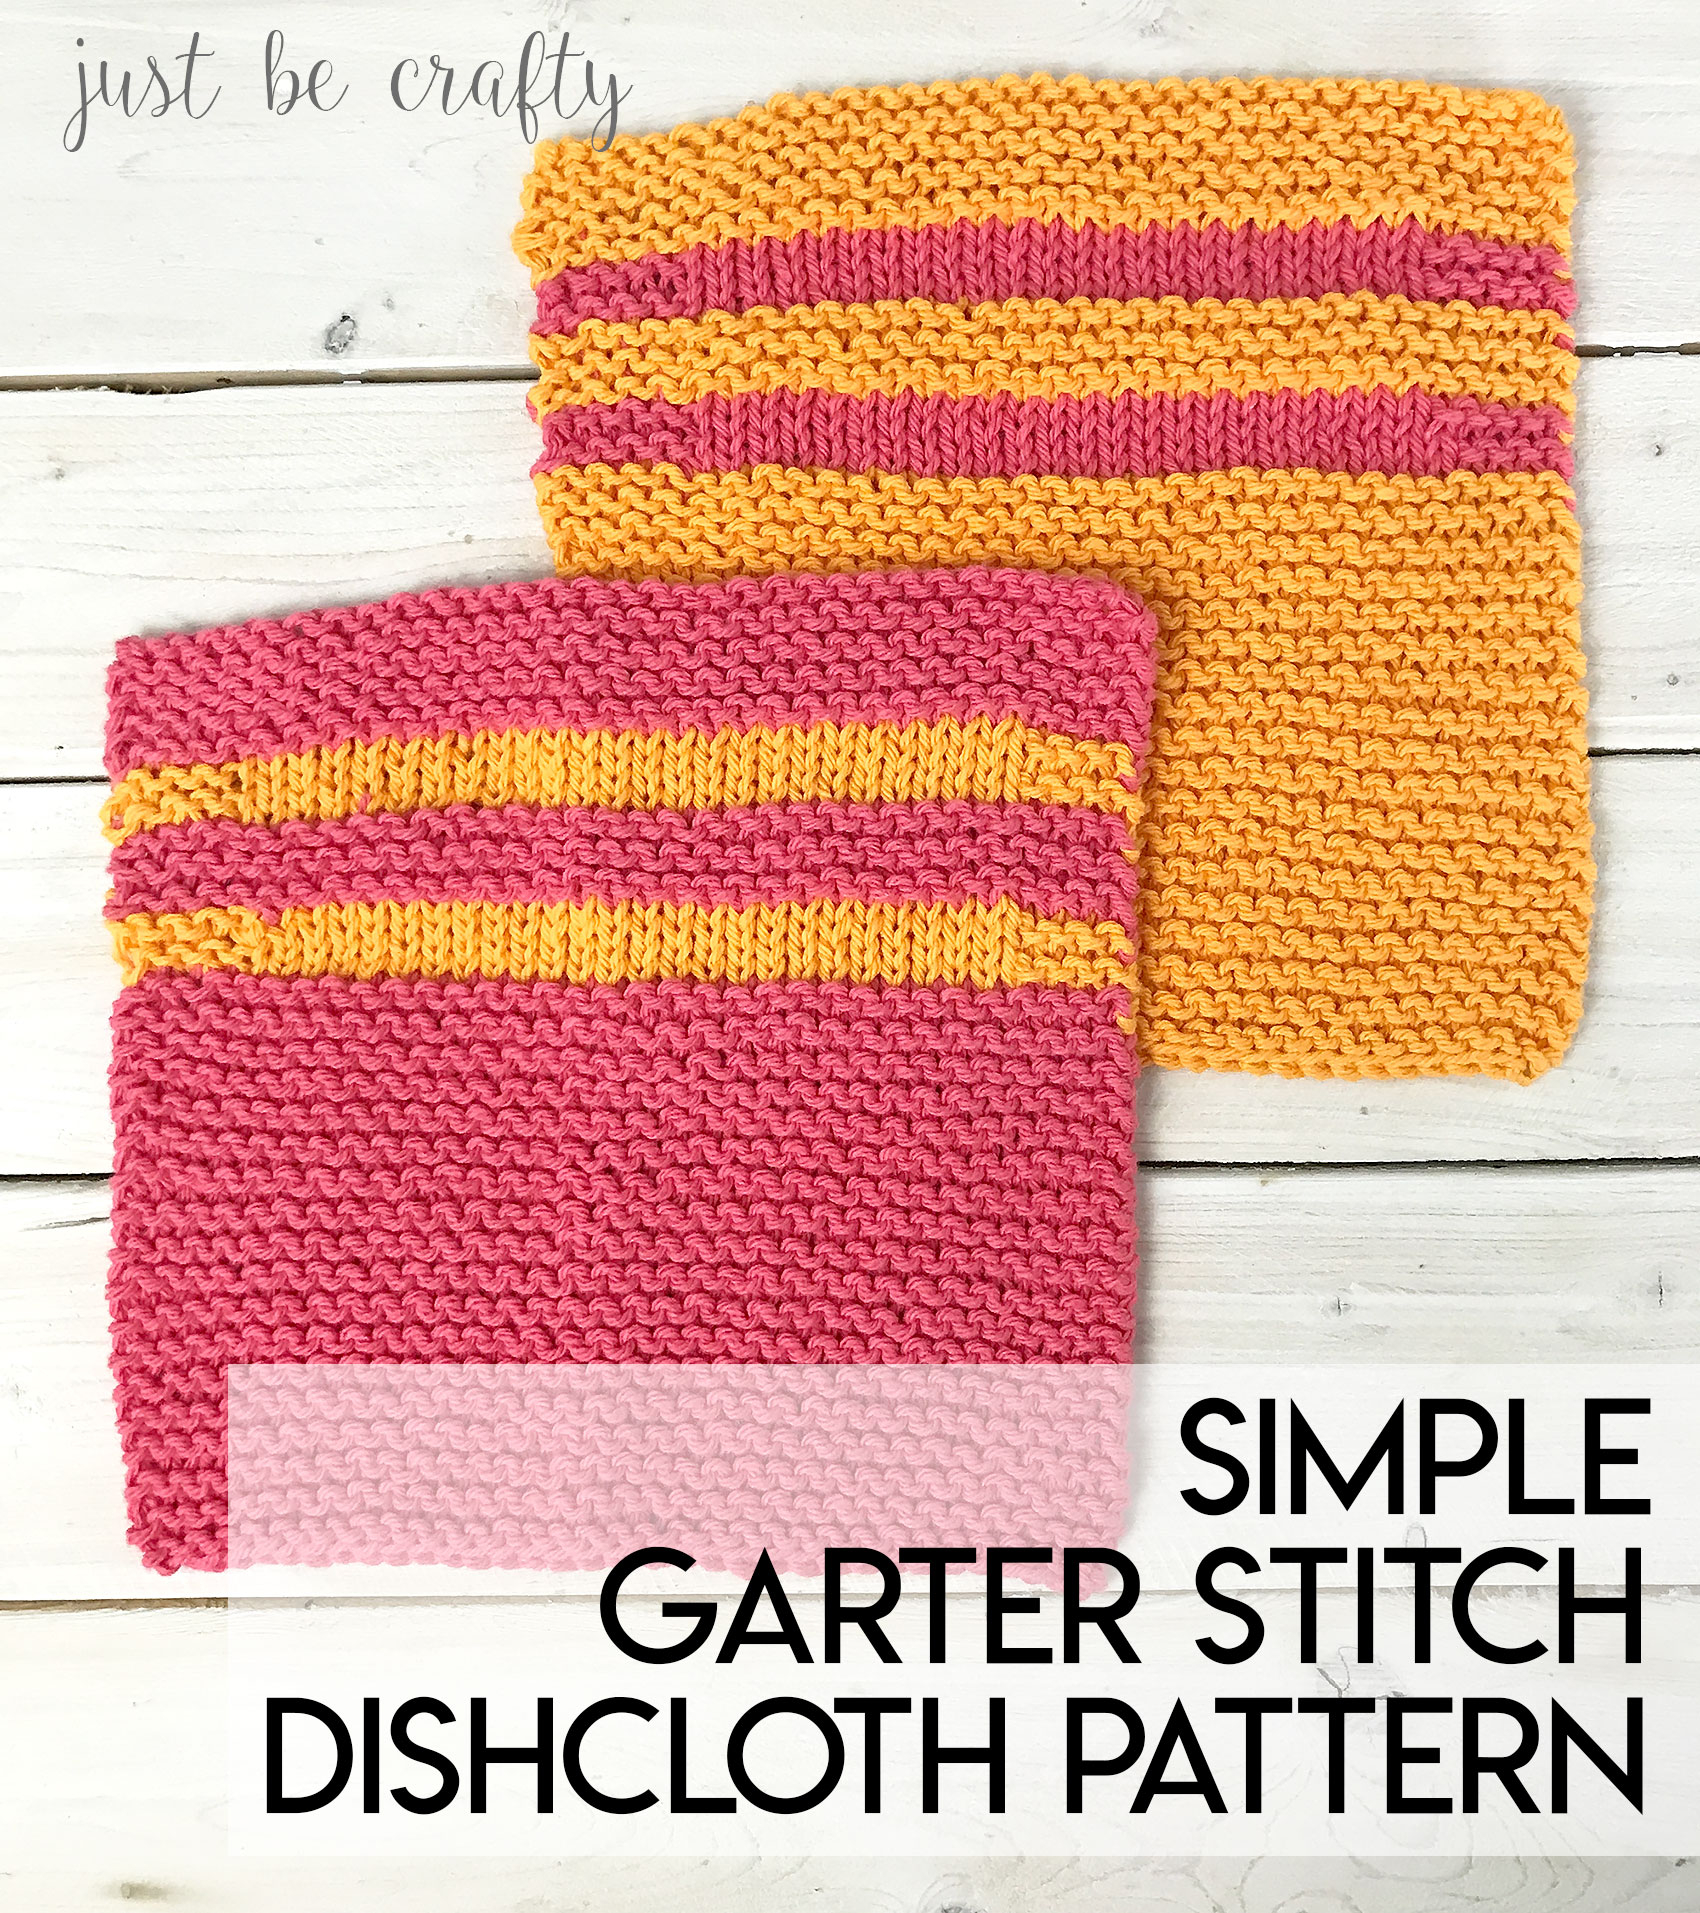 Free Knitted Cotton Dishcloth Patterns Simple Garter Stitch Dishcloth Pattern Free Pattern Just Be Crafty